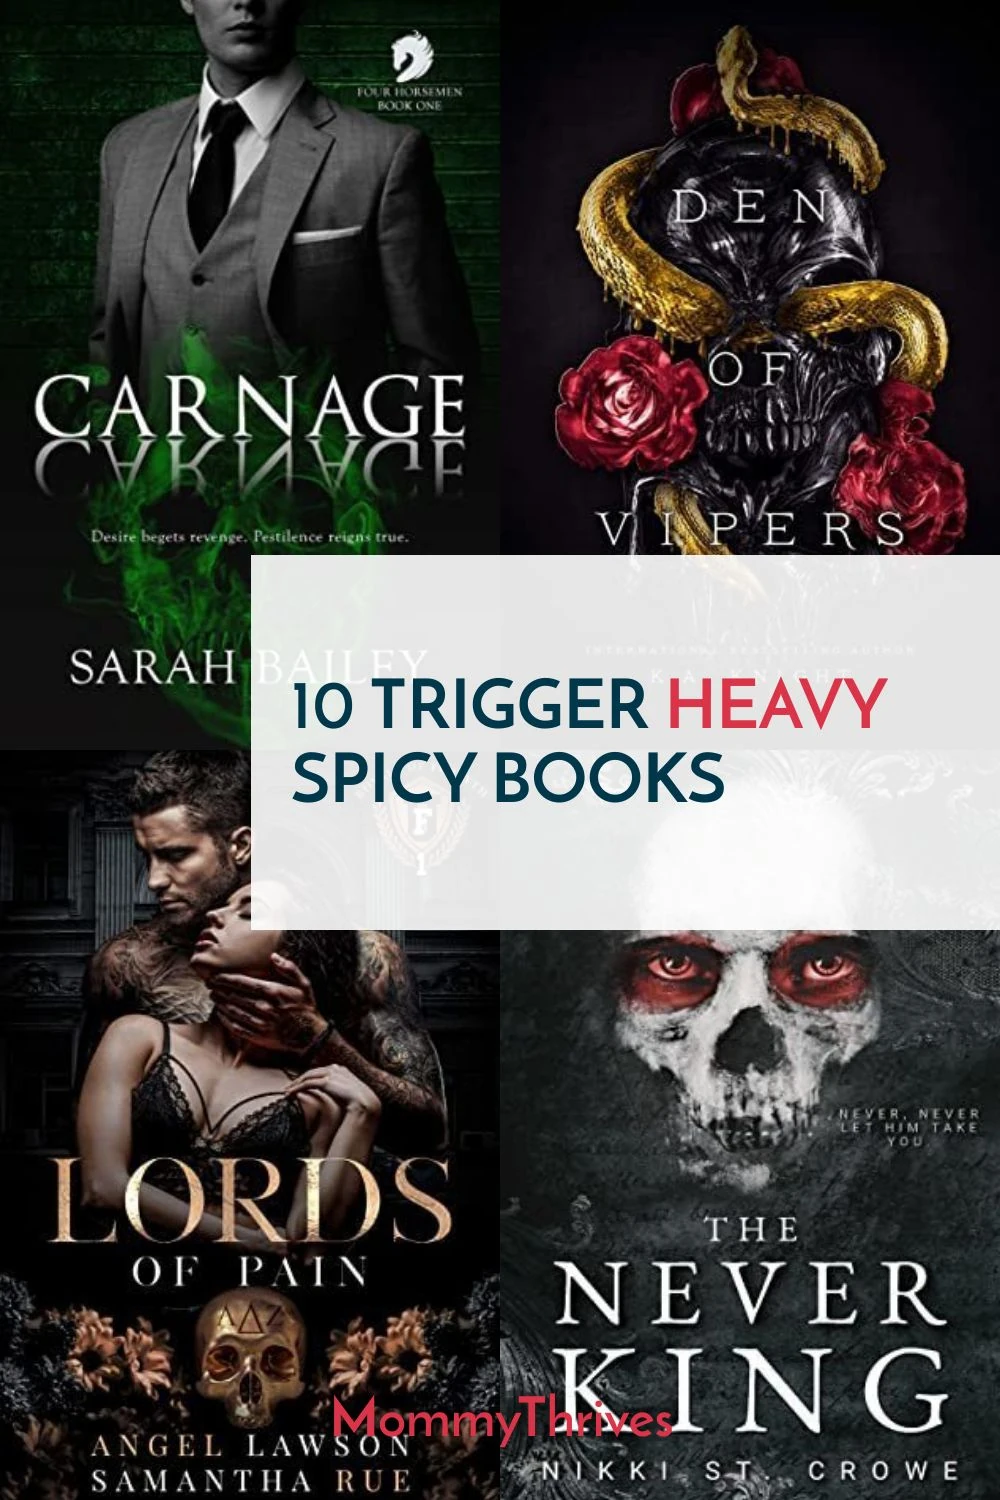 10 Trigger Heavy Spicy Books - Spicy Books With Lots of Triggers - Dark Romance Book Recommendations